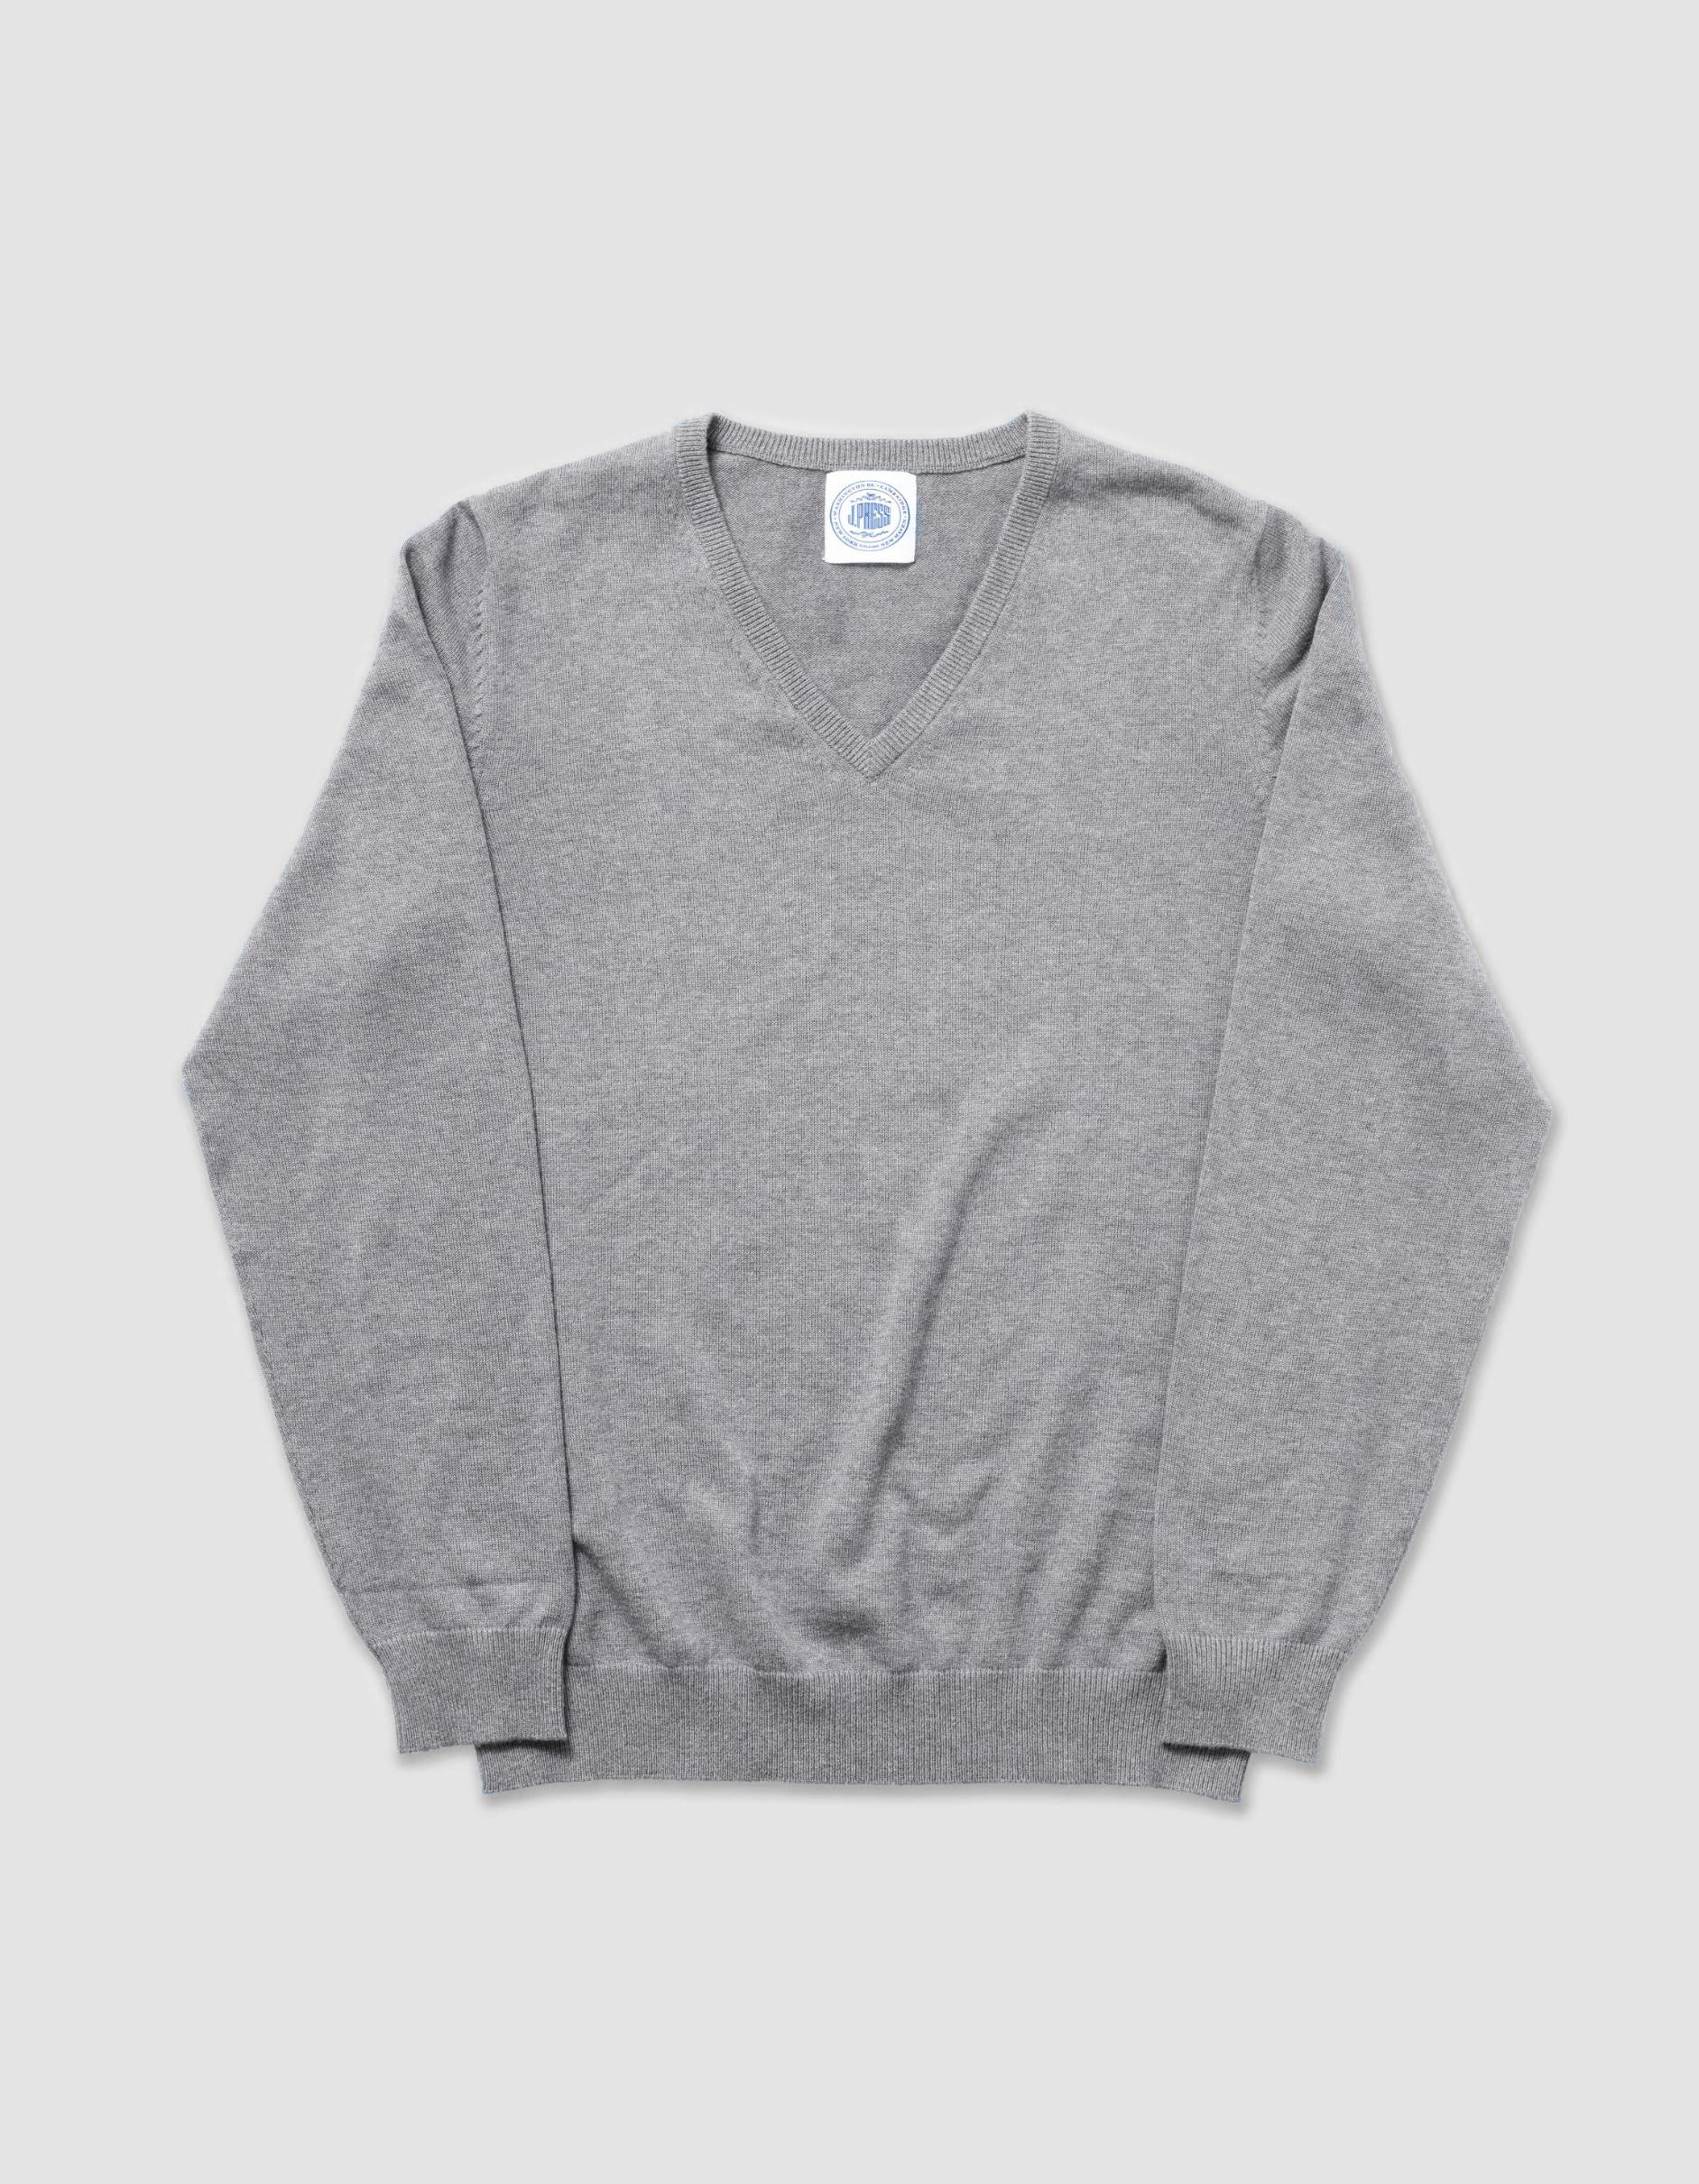 Cotton Cashmere V-Neck Sweater in Grey | Men's Sweaters - J. Press – J ...